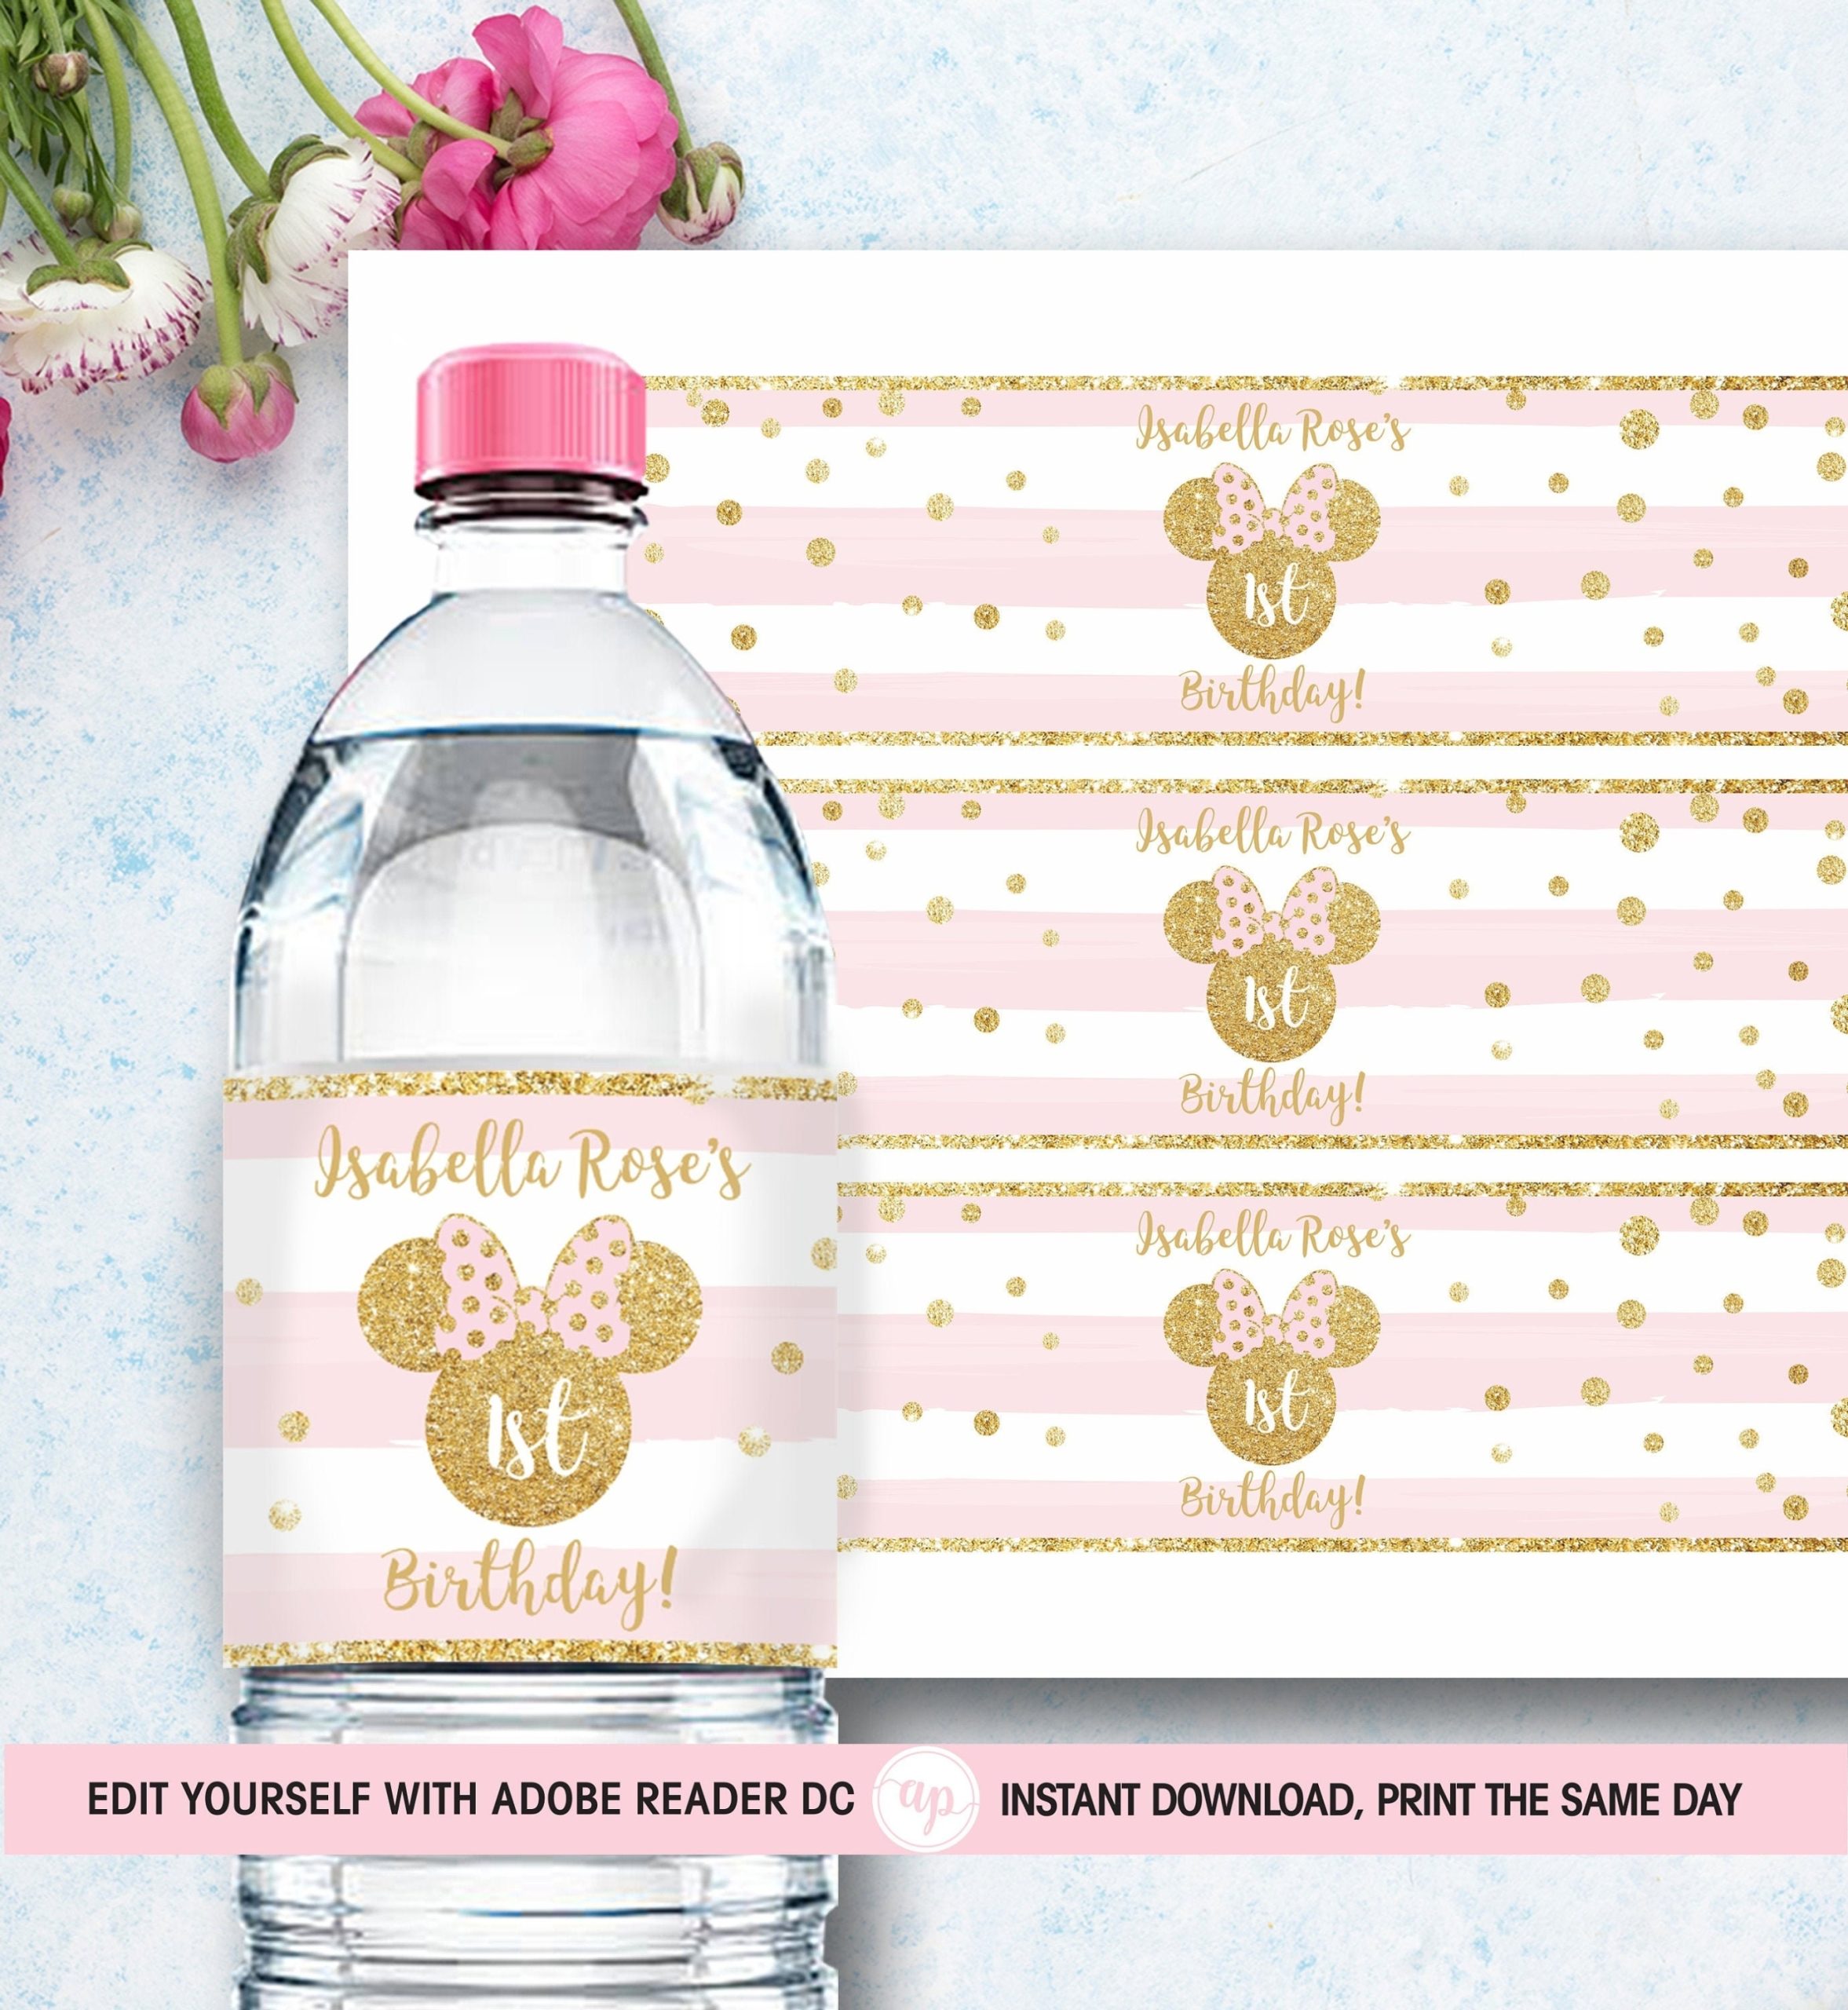 Water Bottle Label Minnie Mouse Template Water Bottle Wrapper | Etsy In Minnie Mouse Water Bottle Labels Template